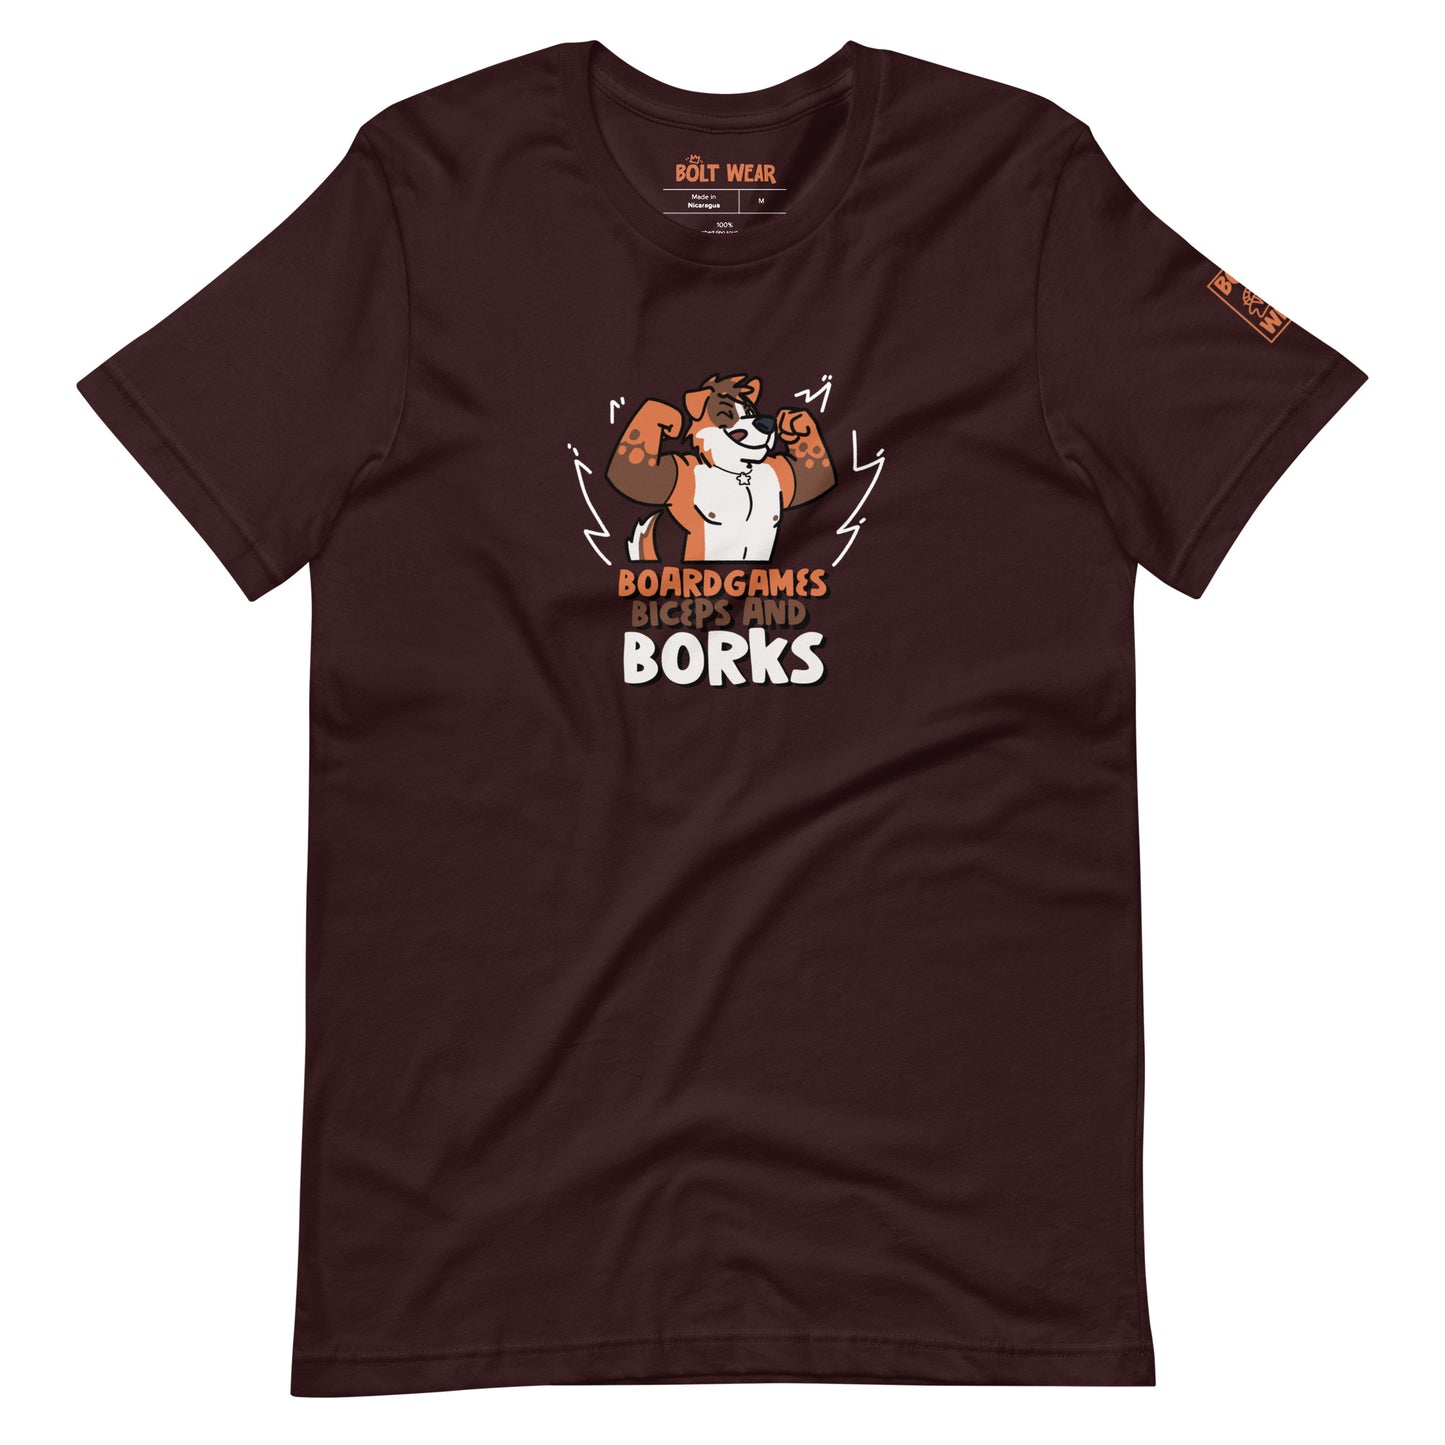 Oxblood black t-shirt with orange and brown furry dog flexing with the text Board Games Biceps and Borks underneath them. Orange logo featured on sleeve